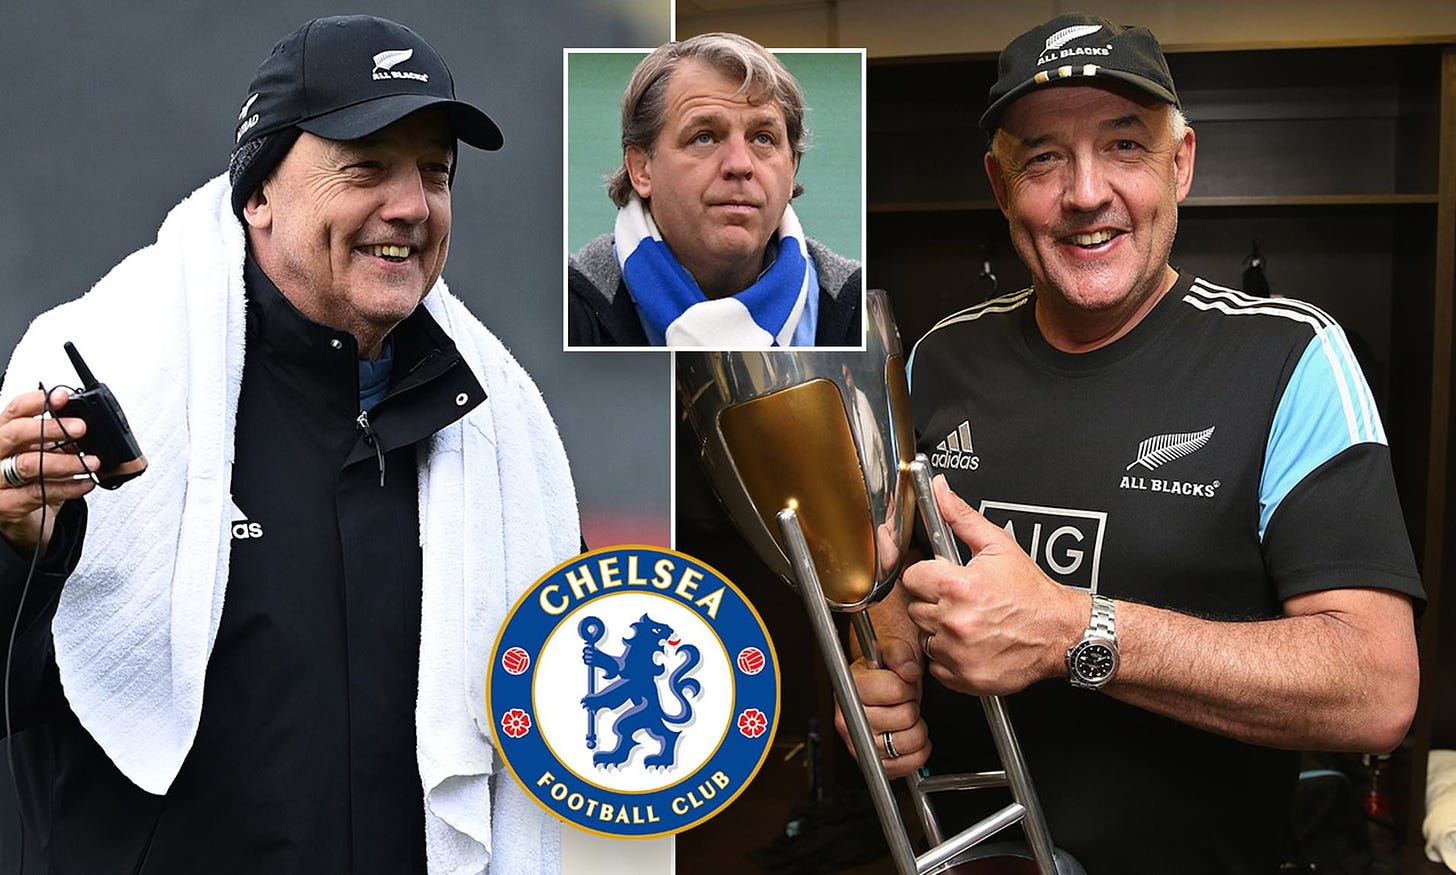 All Blacks' mental skills coach Gilbert Enoka 'hired by Chelsea on a  short-term basis' | Daily Mail Online